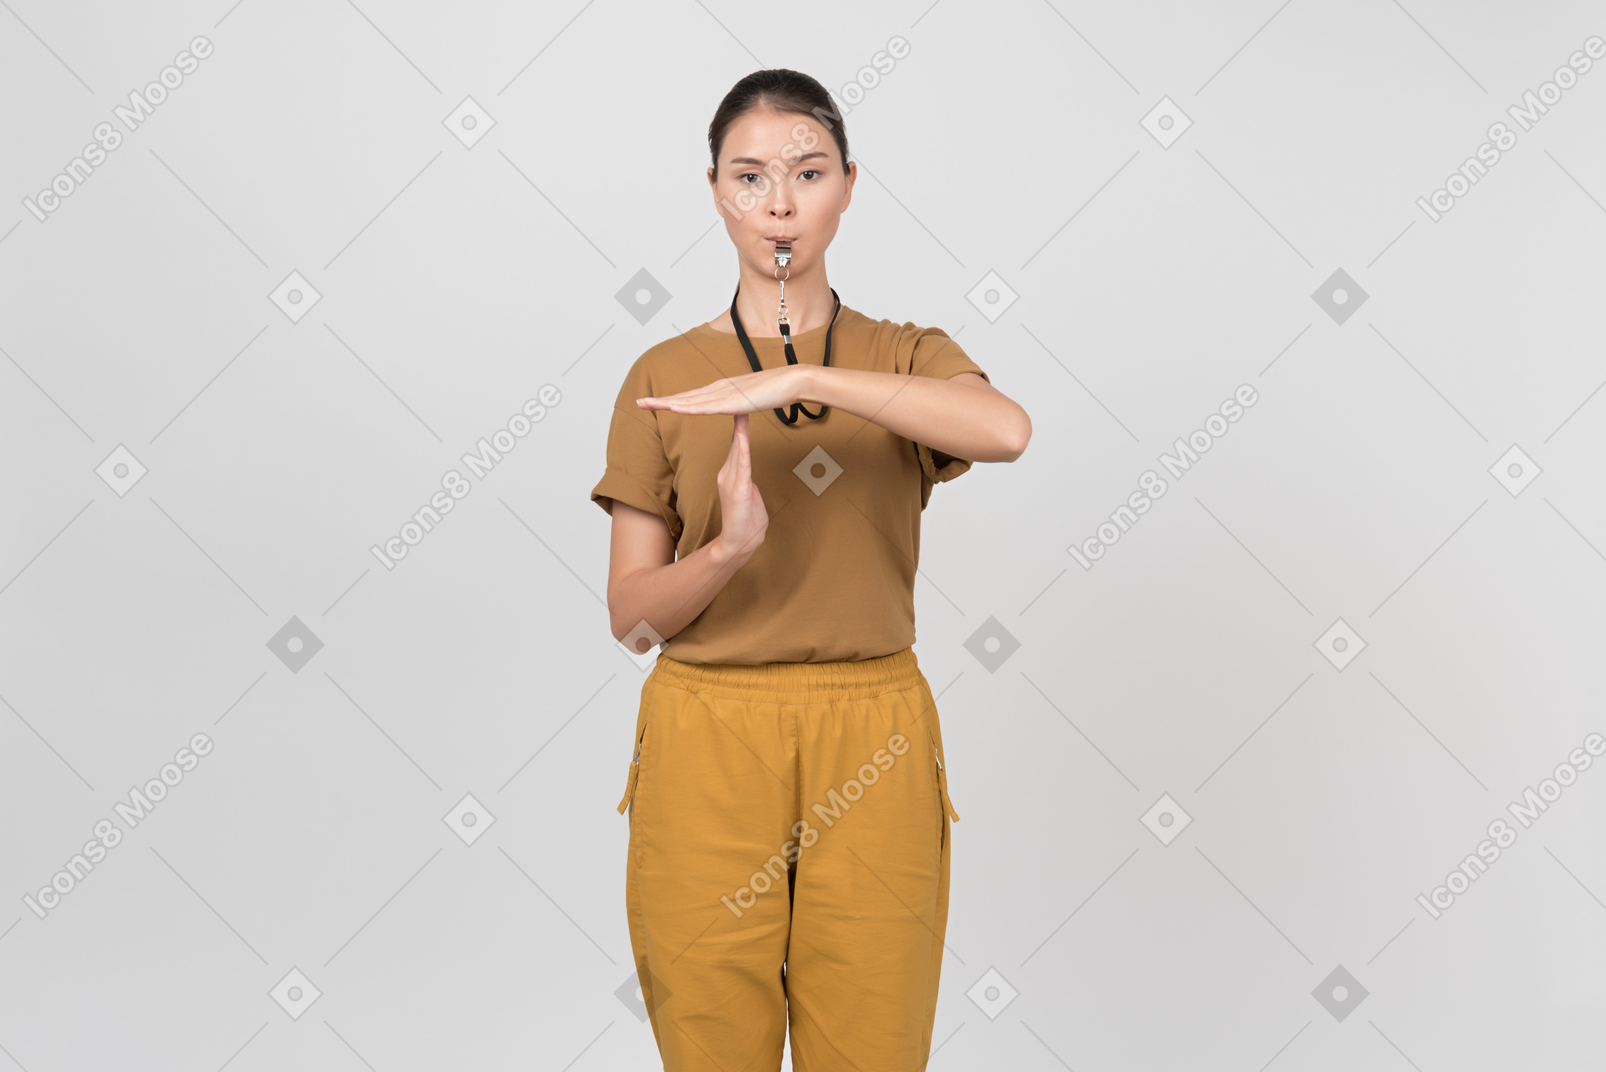 Woman showing a break sign with her hands and blowing a whistle